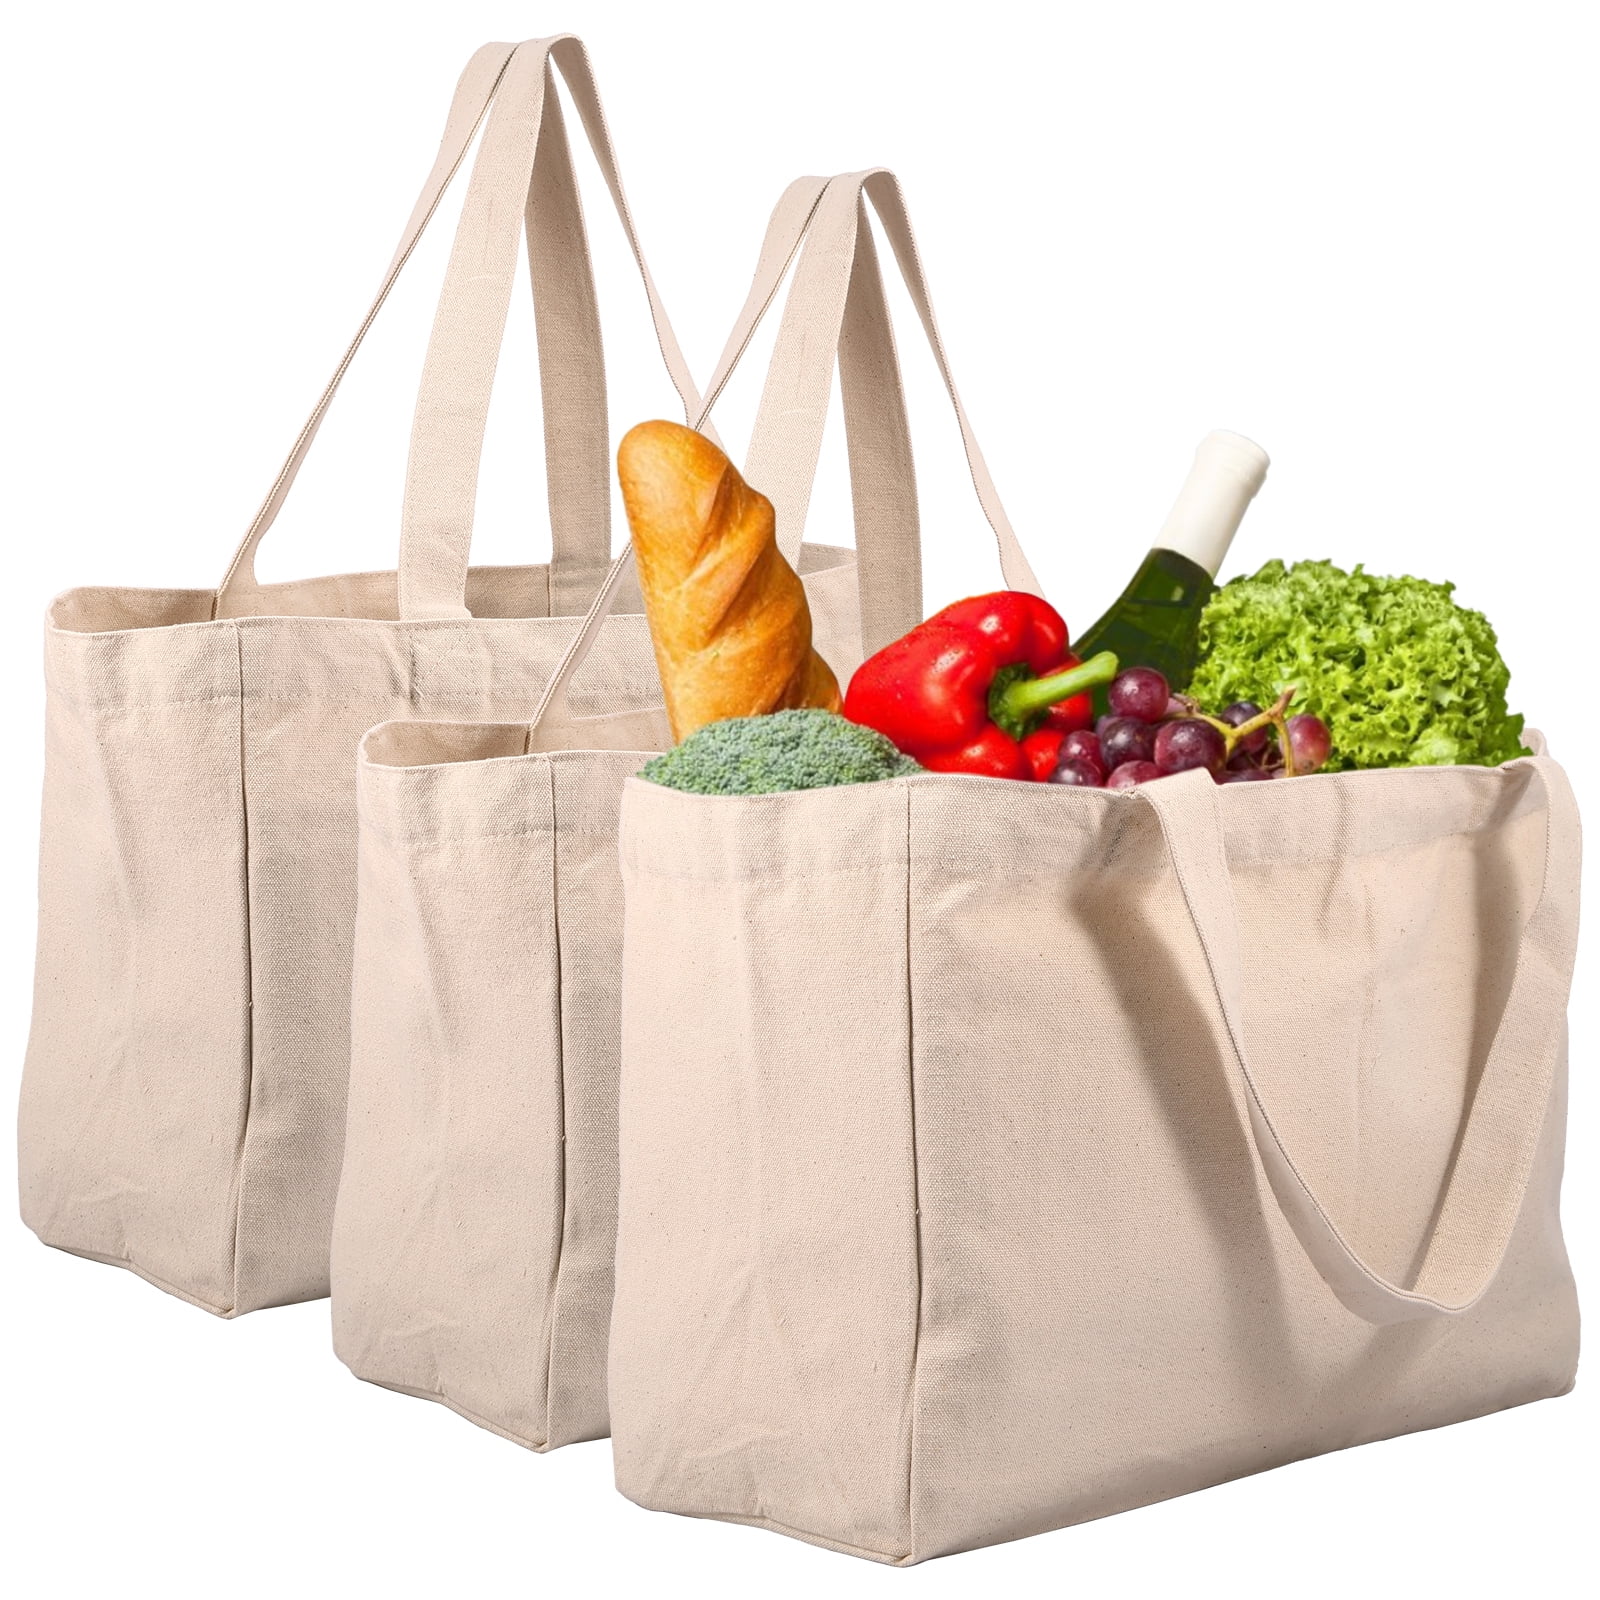 3Pcs Canvas Grocery Bag Large Capacity Grocery Shopping Bags Heavy Duty ...